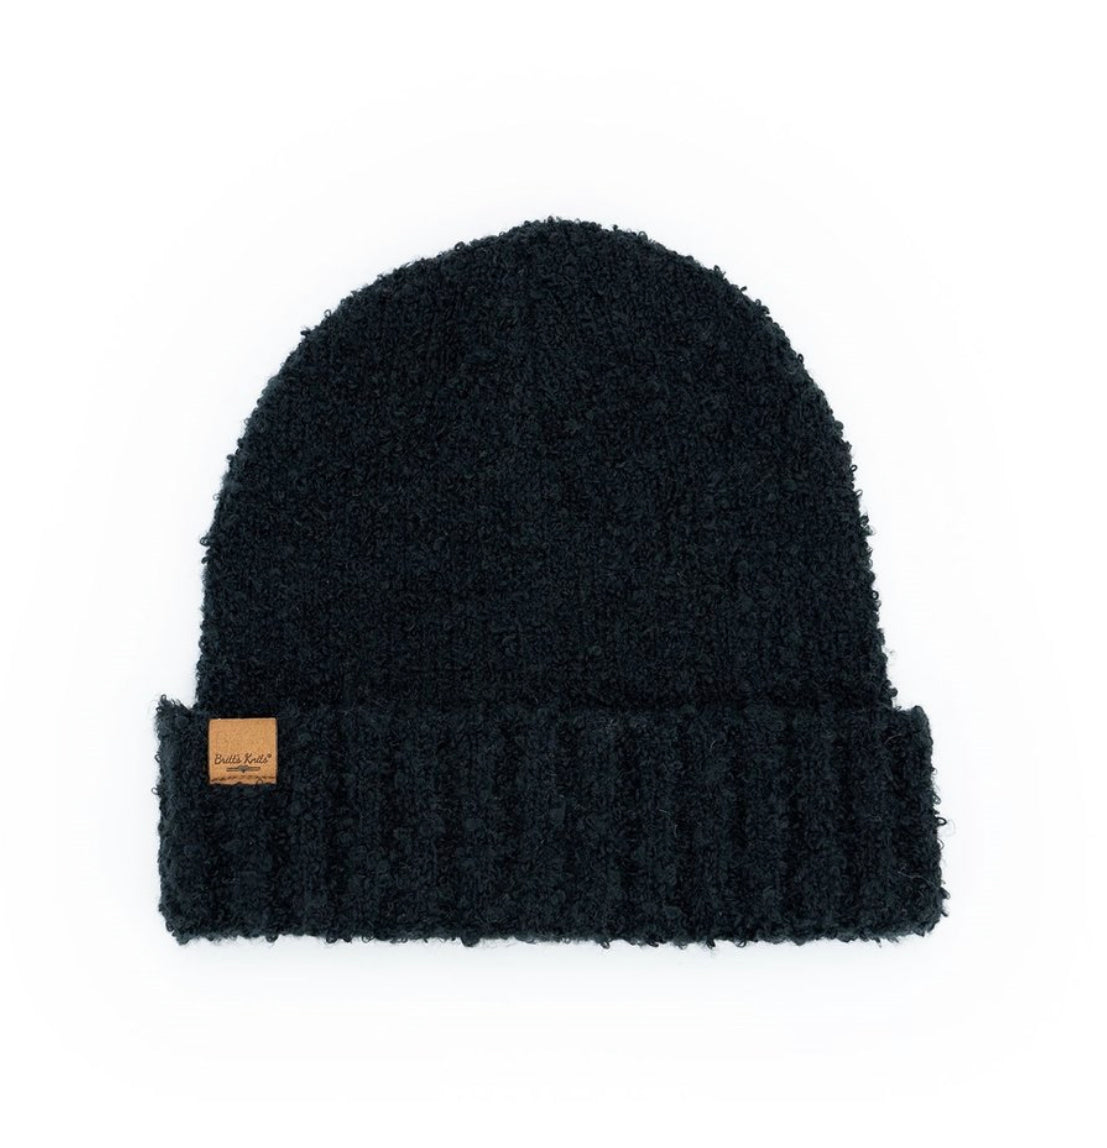 Britts Knits Common Good Beanie Hat - Black